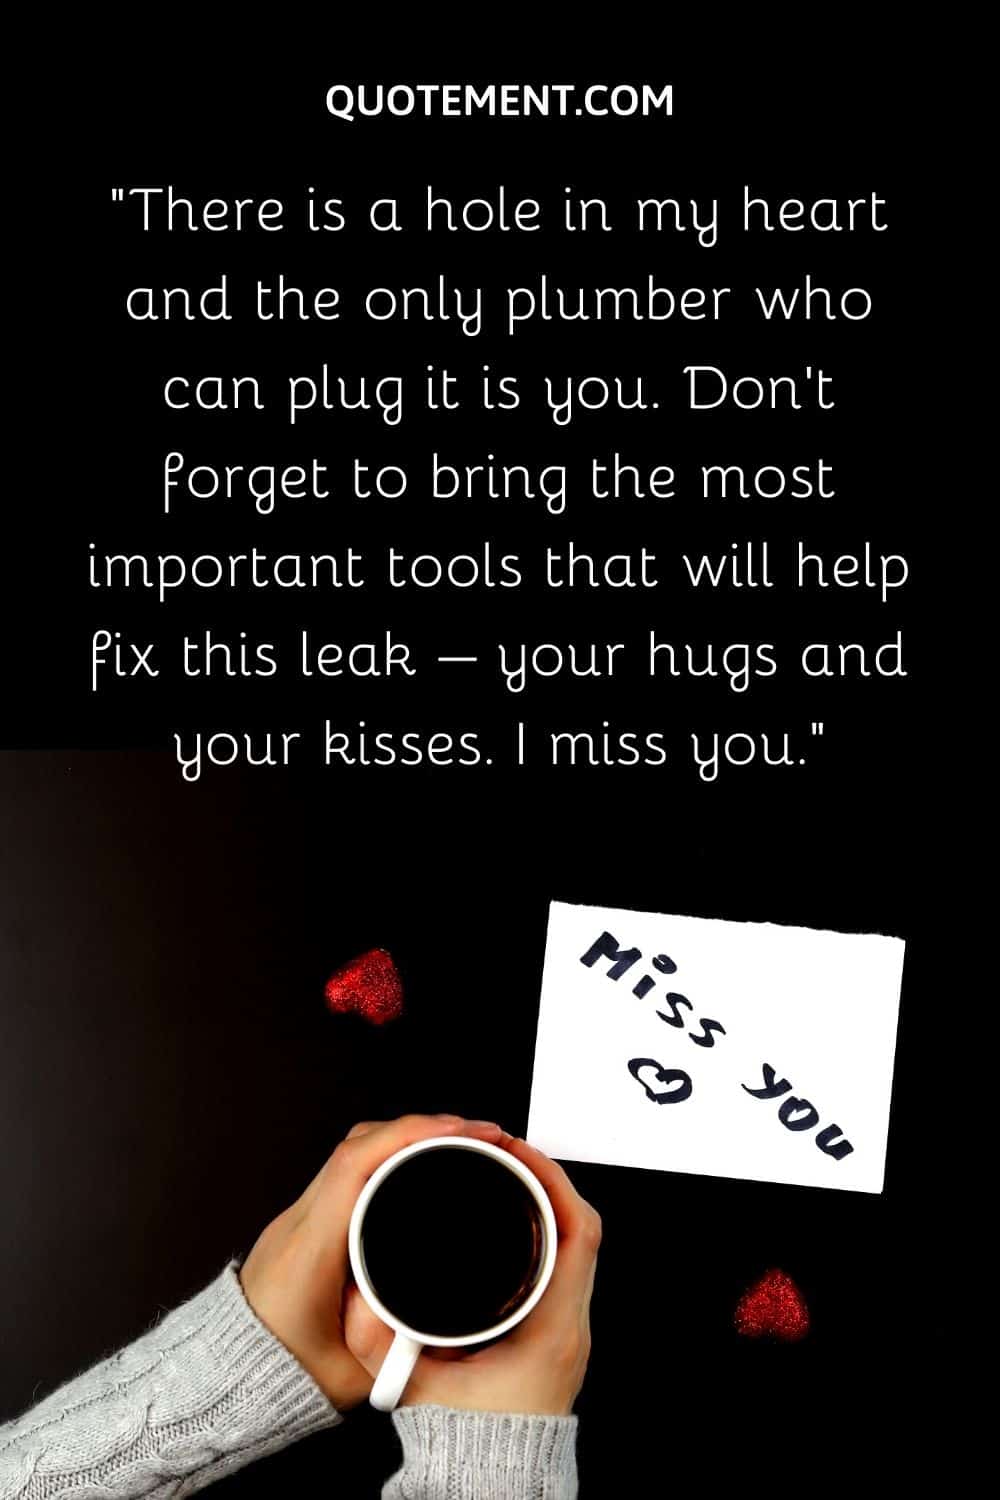 There is a hole in my heart and the only plumber who can plug it is you.